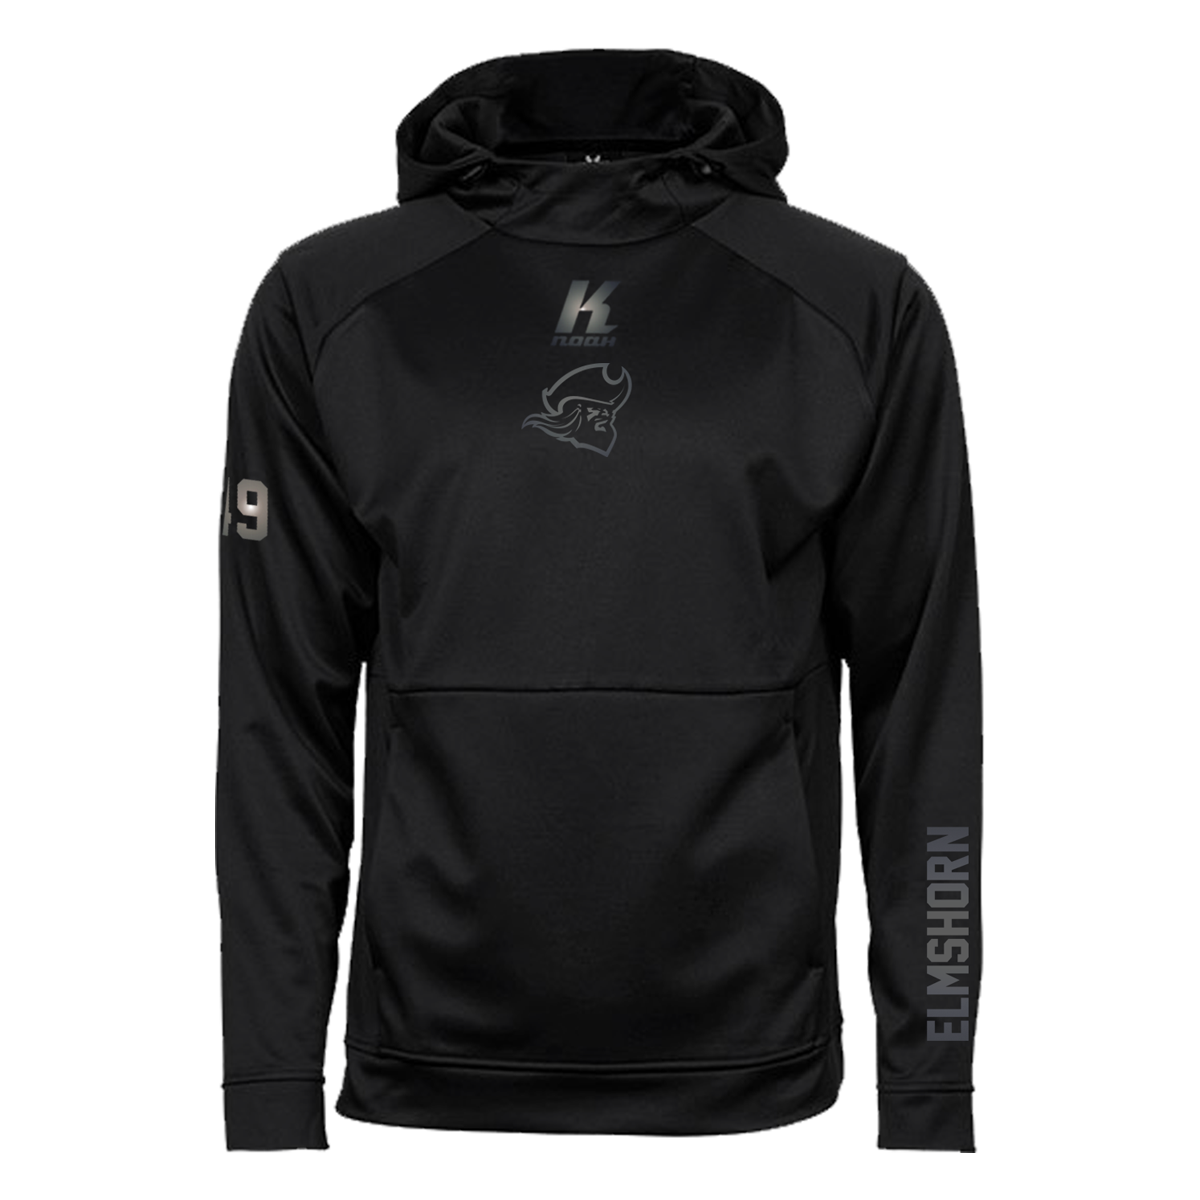 Fighting Pirates "Blackline" Performance Hoodie JH006 with Playernumber or Initials